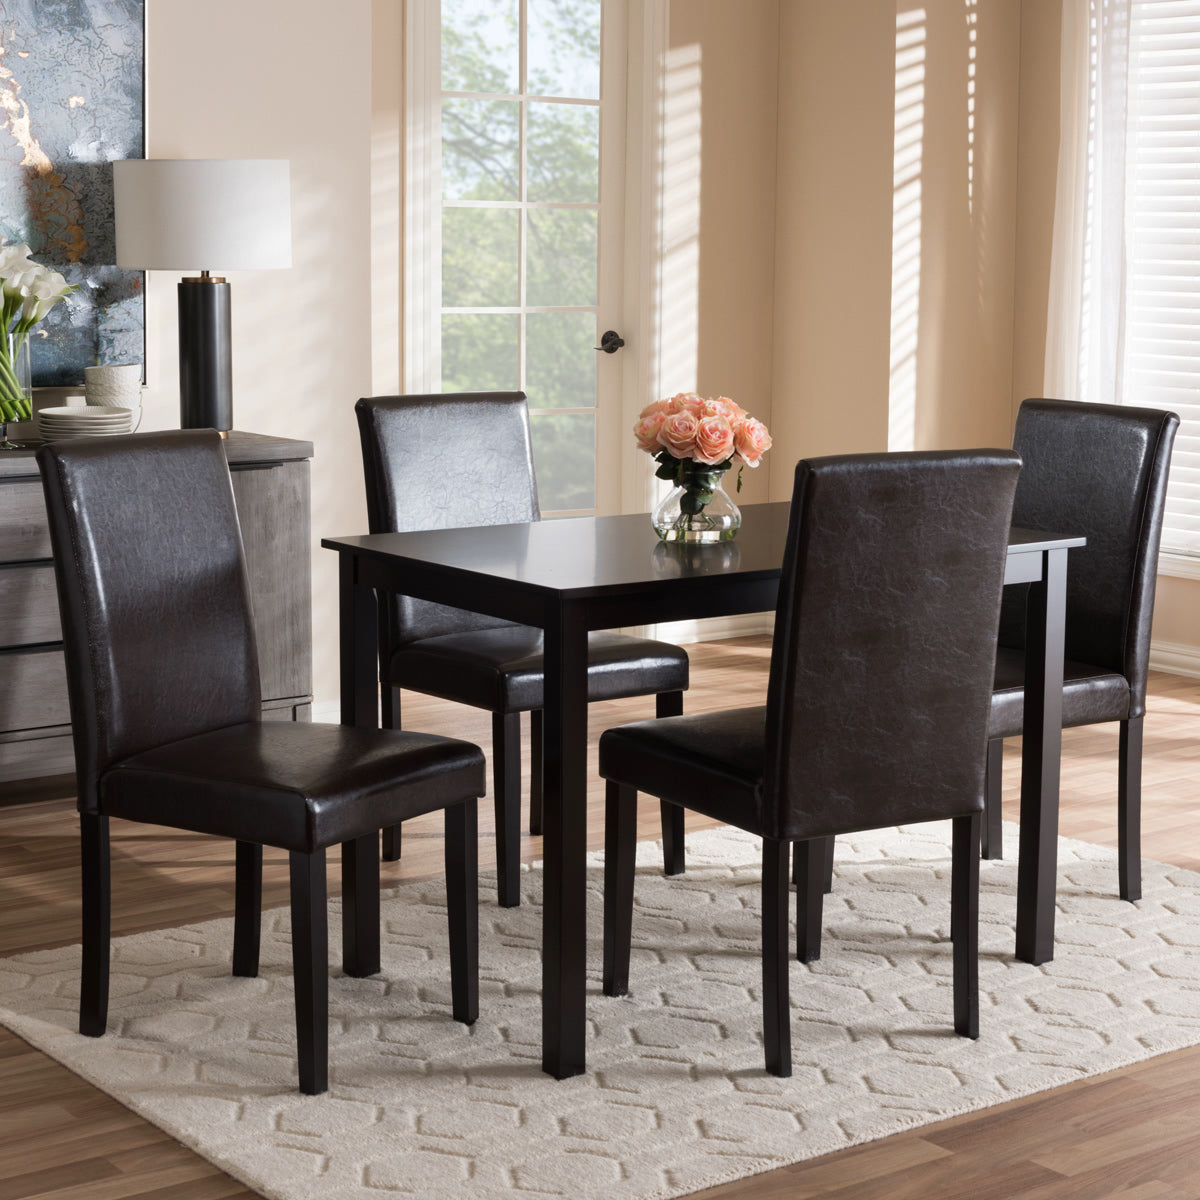 Baxton Studio Mia Modern and Contemporary Dark Brown Faux Leather Upholstered 5-Piece Dining Set Baxton Studio-0-Minimal And Modern - 5